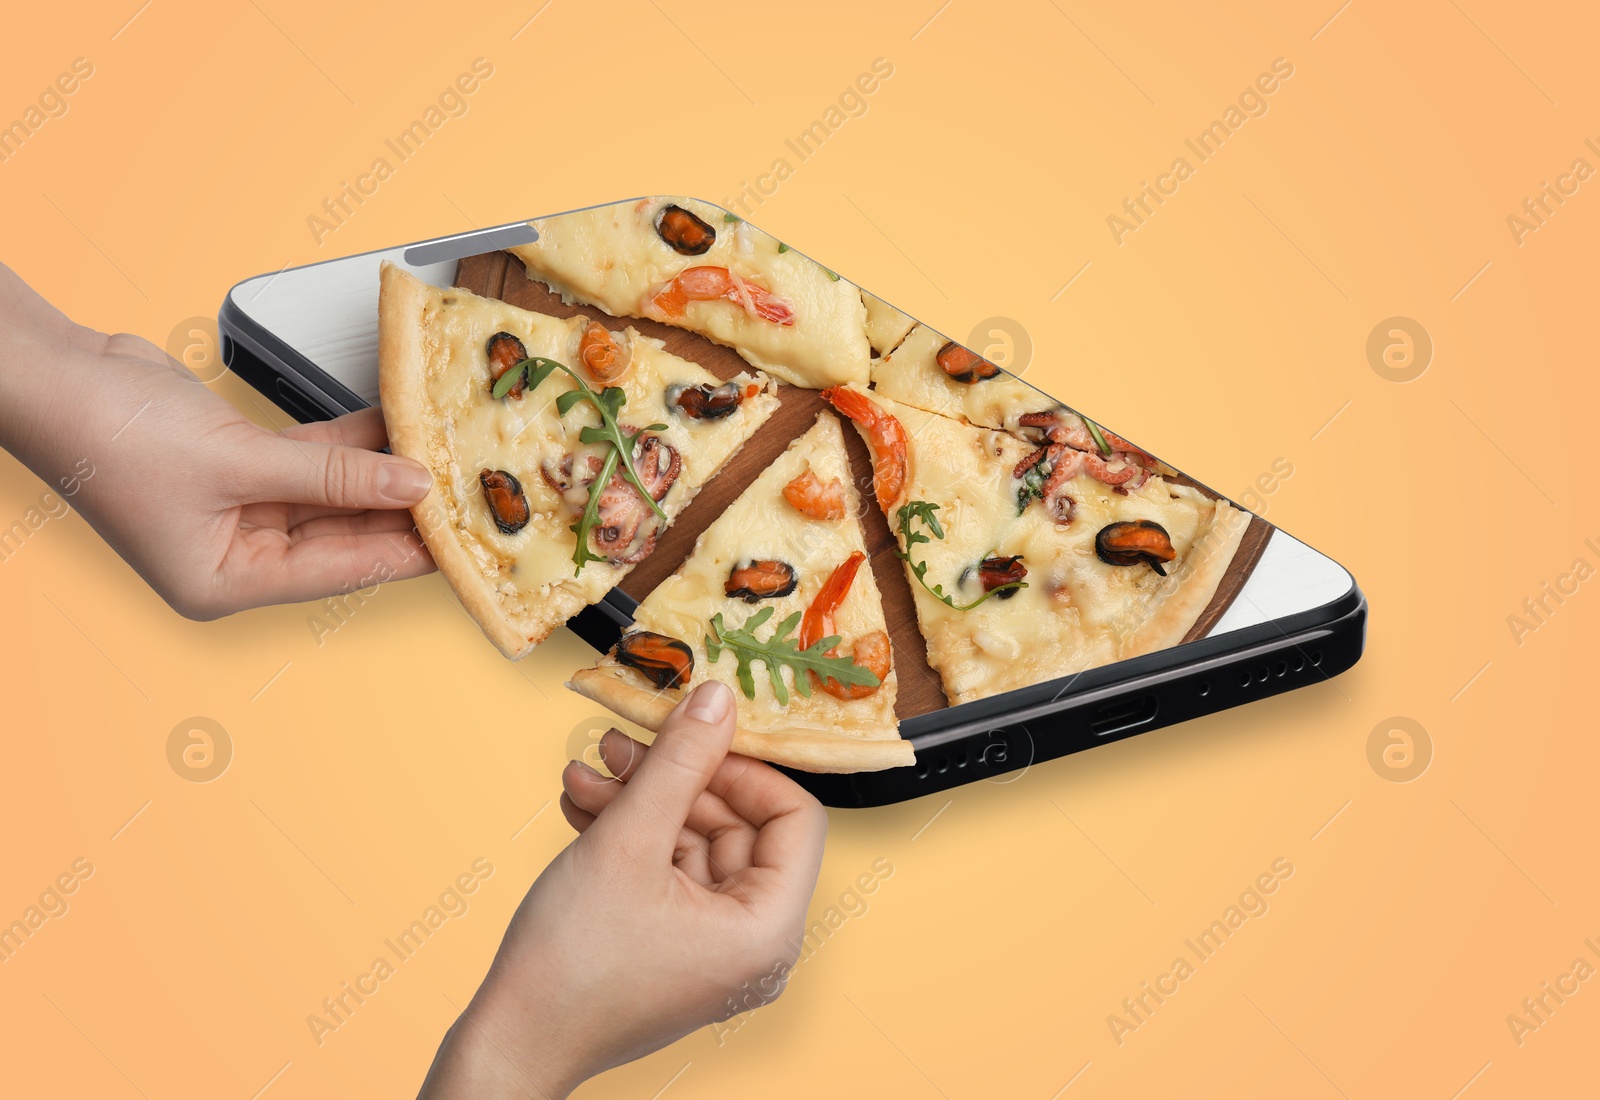 Image of Online food ordering. Friends taking pizza slices from smartphone screen against orange background, closeup